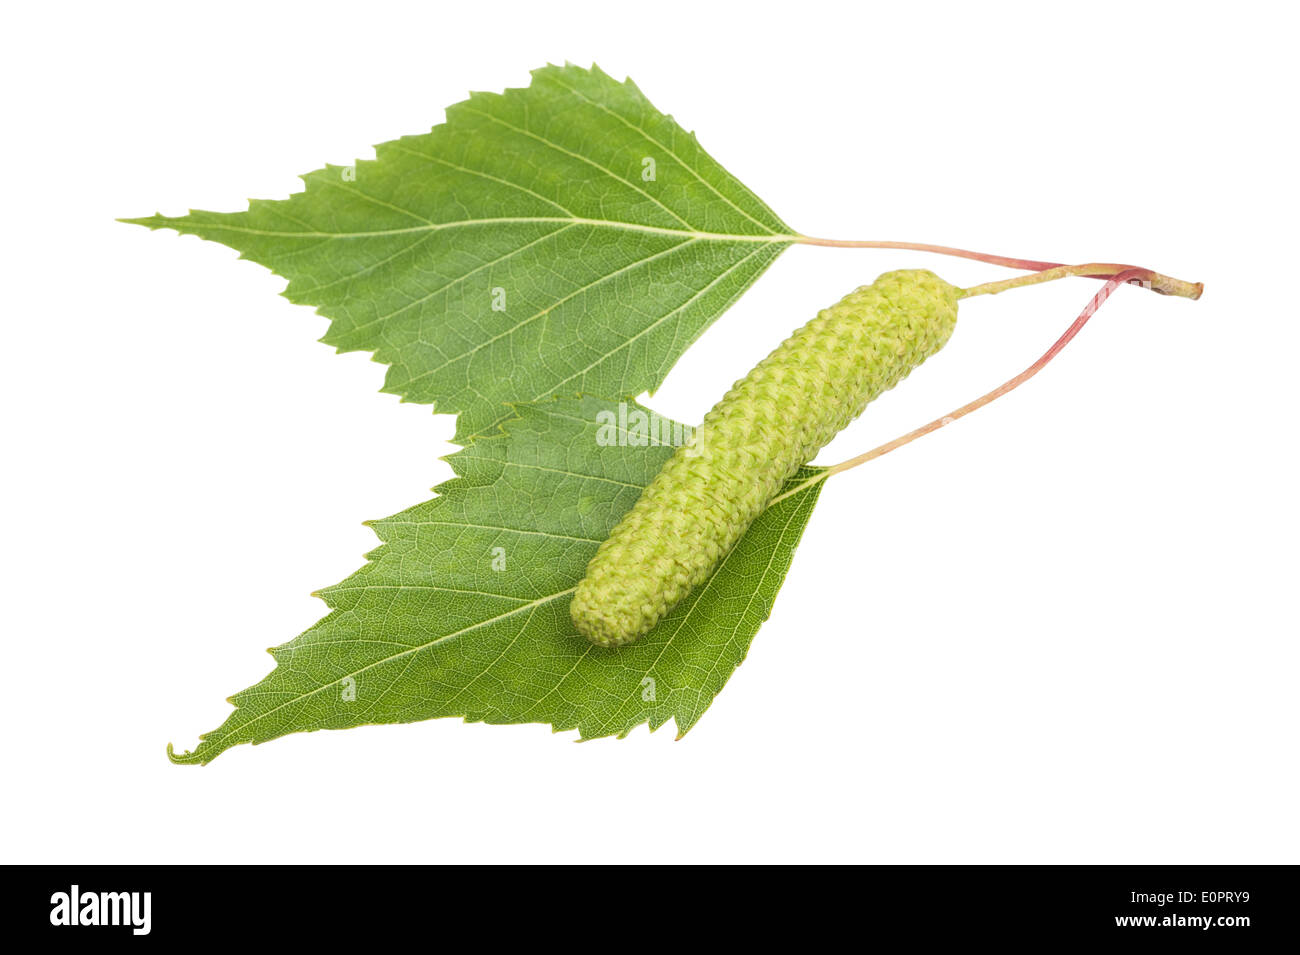 Birch sprig with catkin isolated on white. Stock Photo